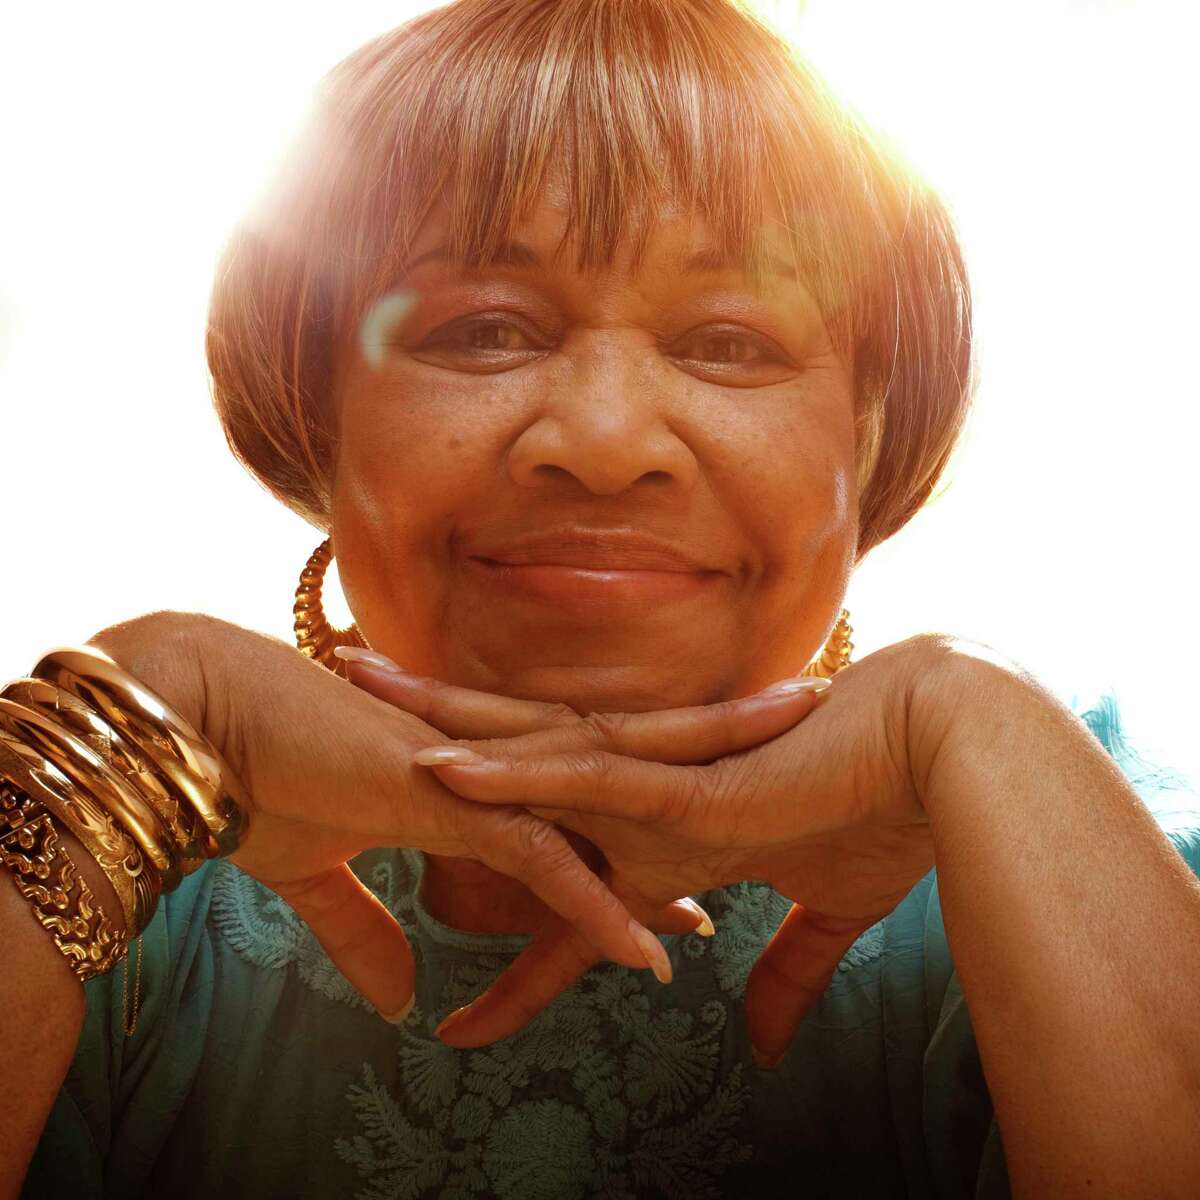 Gospel/soul legend Mavis Staples will perform at the Emelin Theatre's 40th Anniversary Gala Thursday, Oct. 18, at the Beach Point Club in Mamaroneck, N.Y.